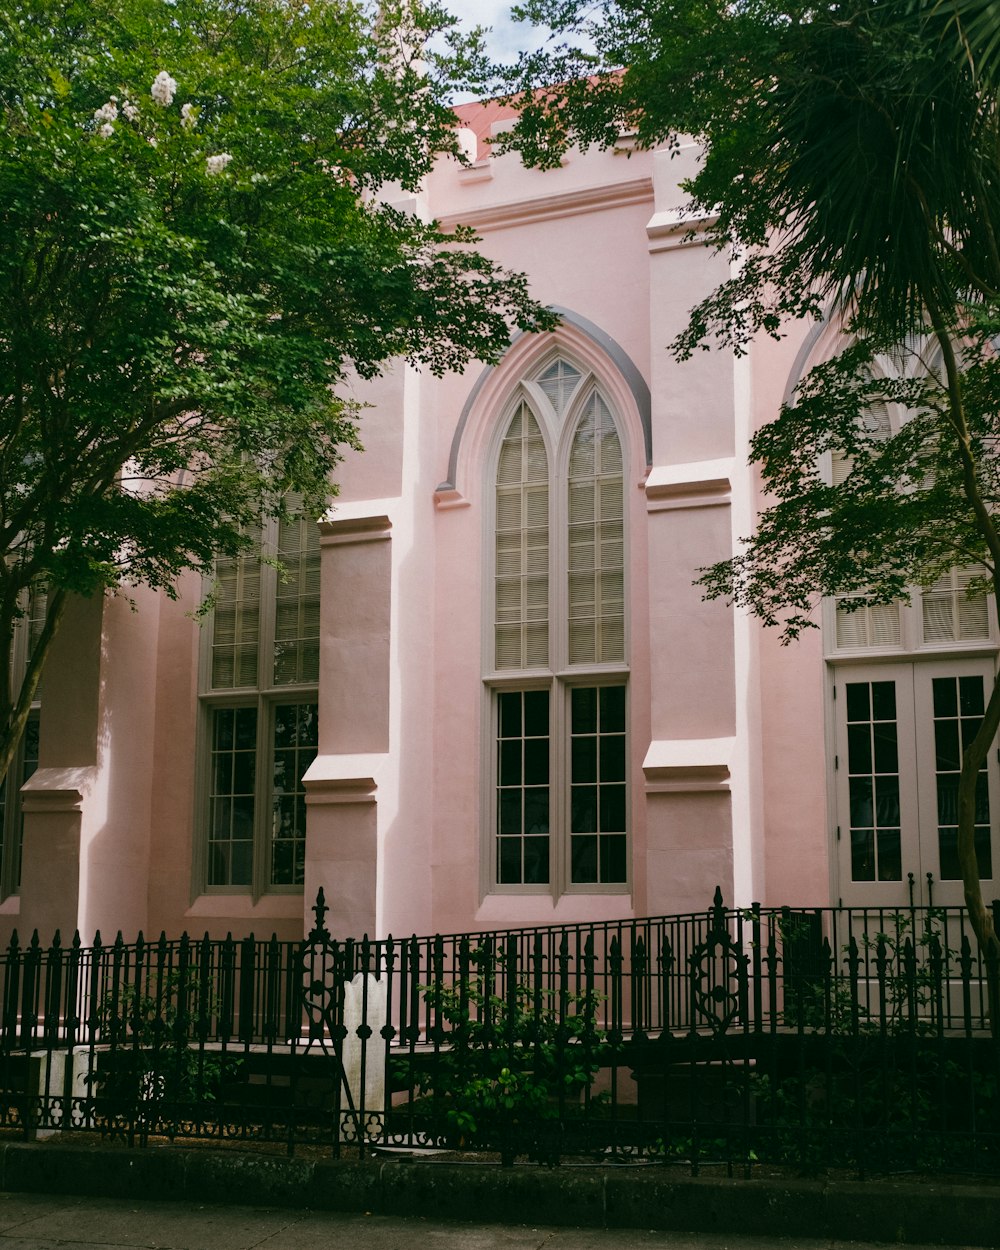 a pink building with a black fence around it